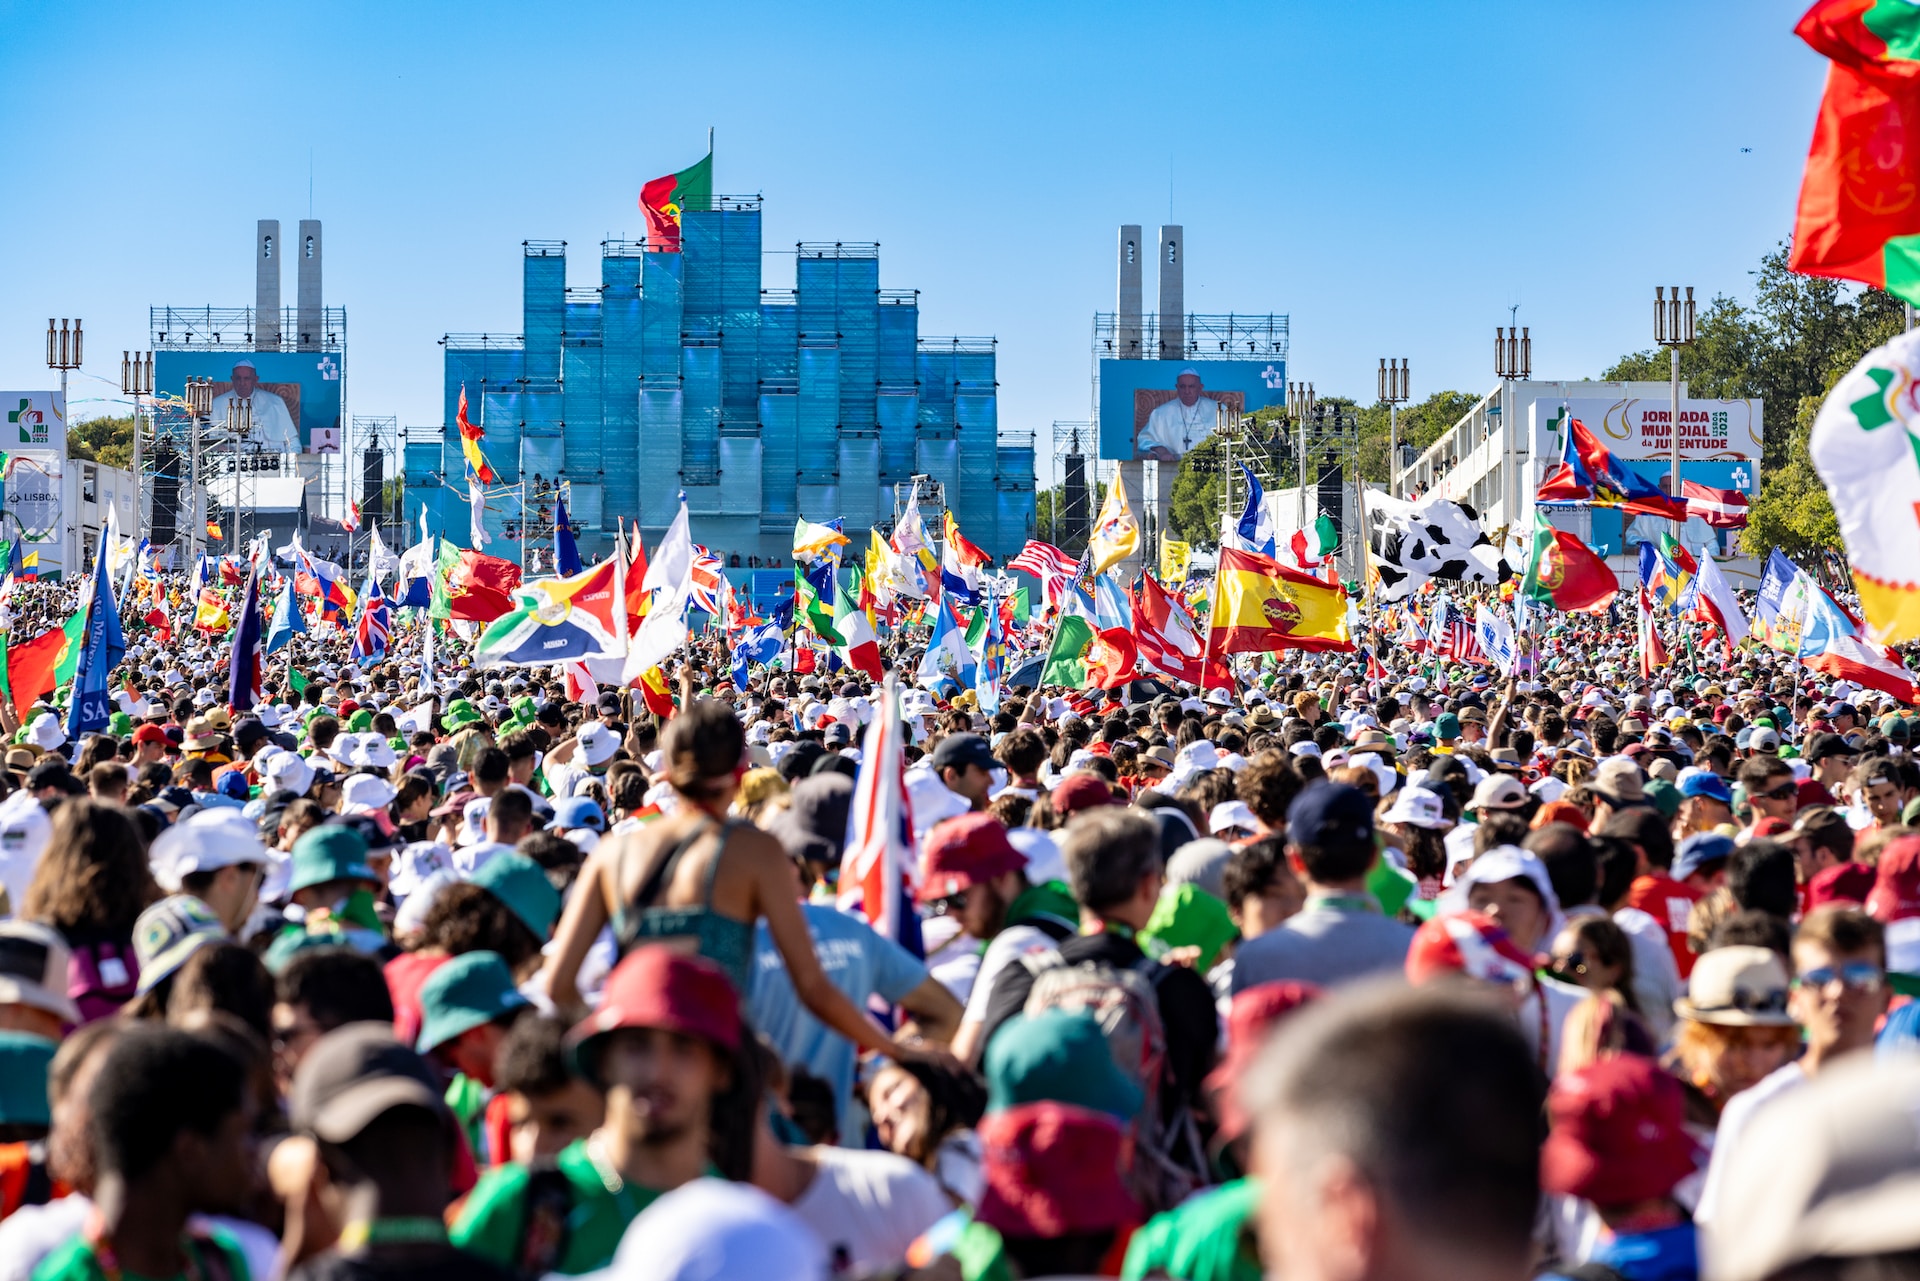 Pope Francis at World Youth Day in Lisbon